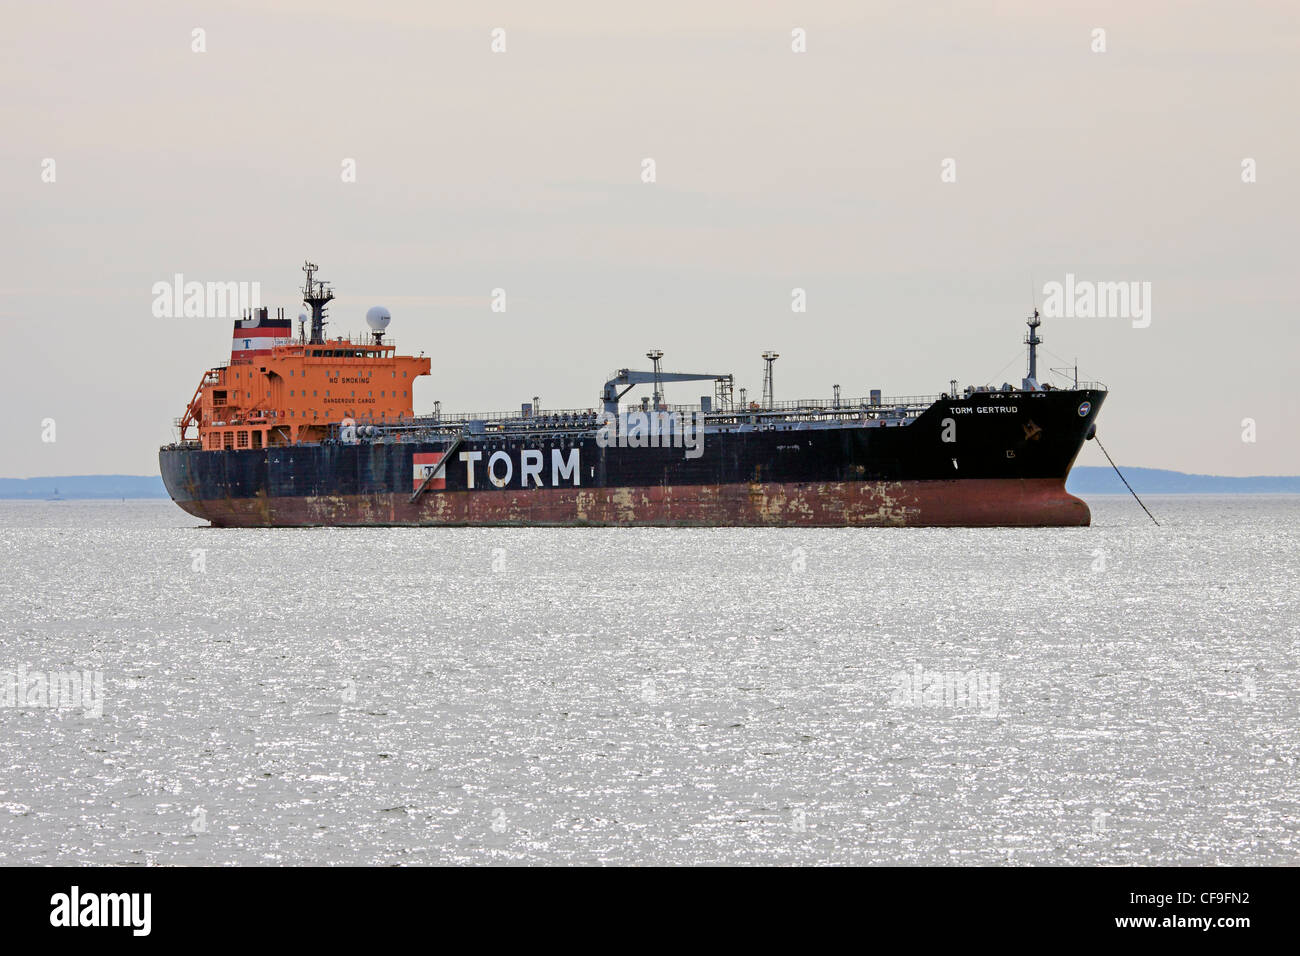 The Torm Gertrud oil tanker out of Denmark, anchored in New York harbor Stock Photo